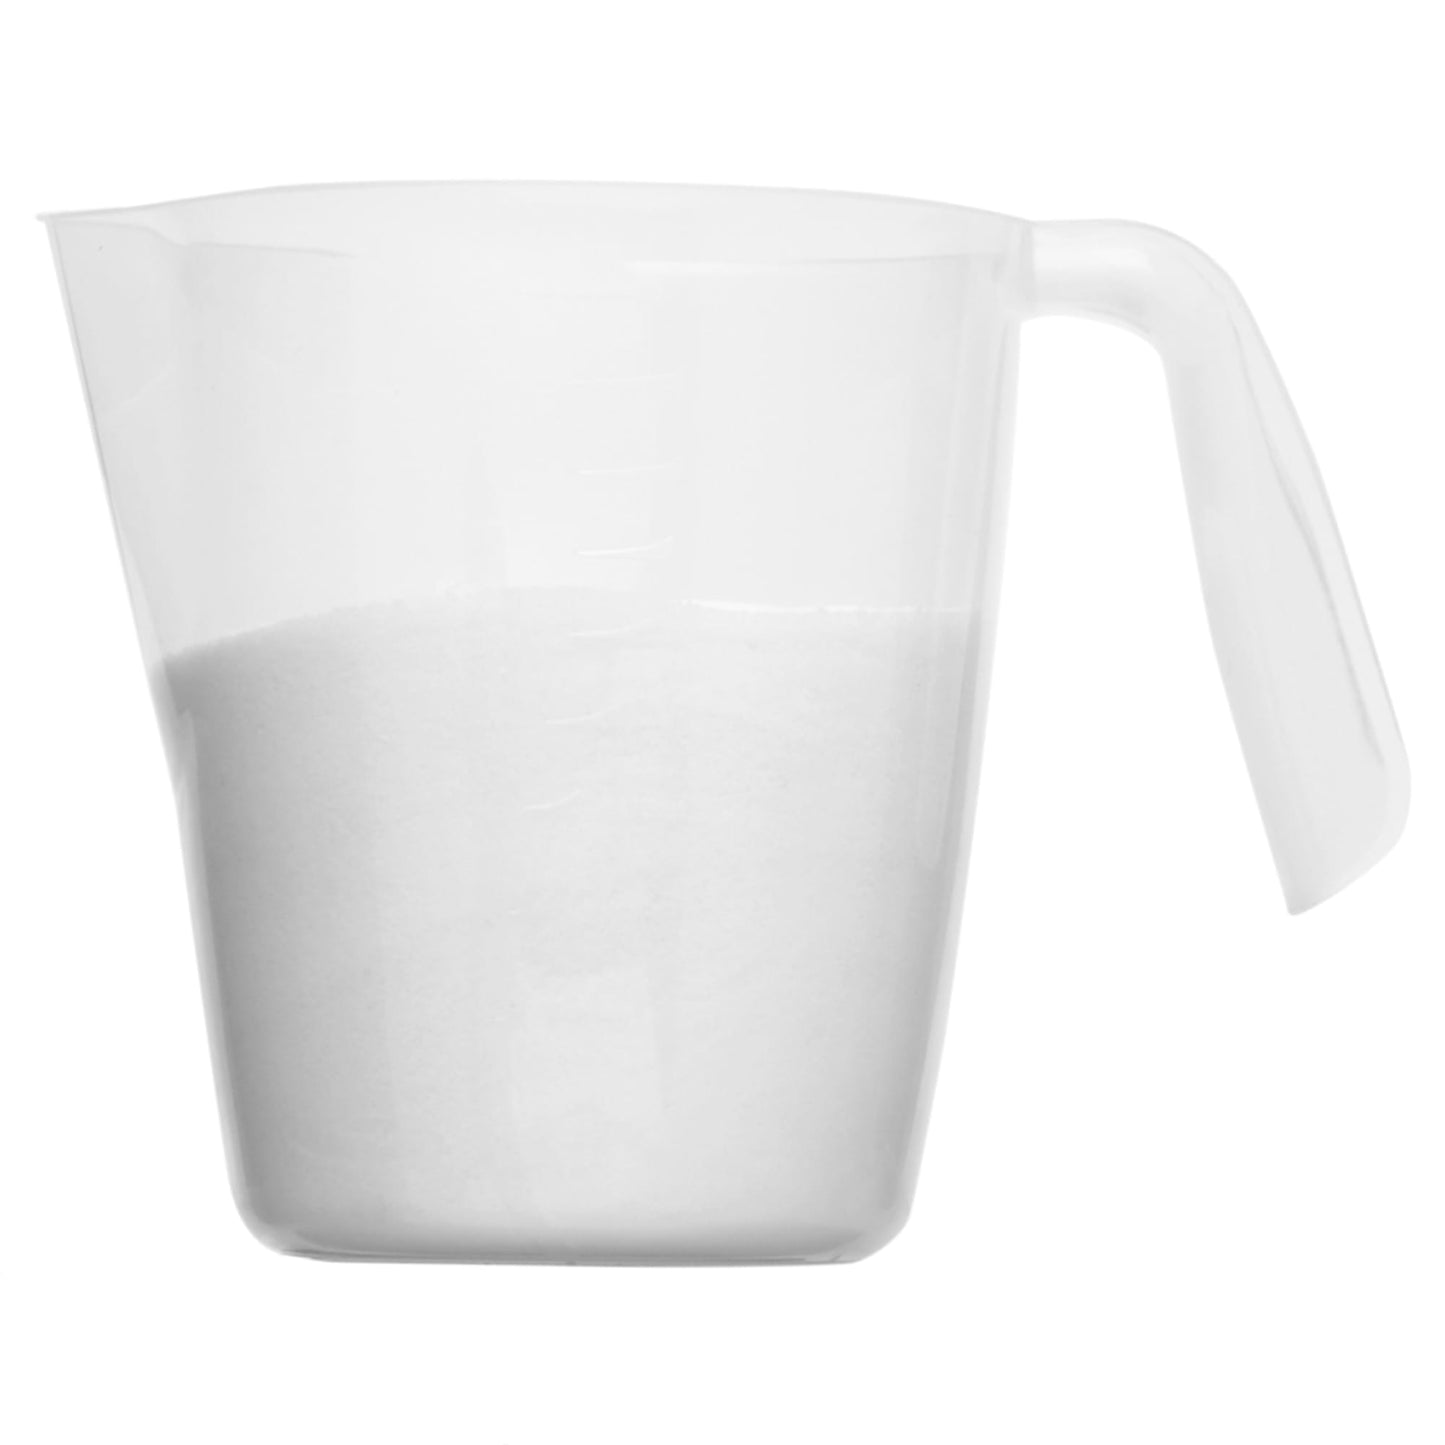 1000 ml Plastic Measuring Cup with Raised Measurement Markings, Clear